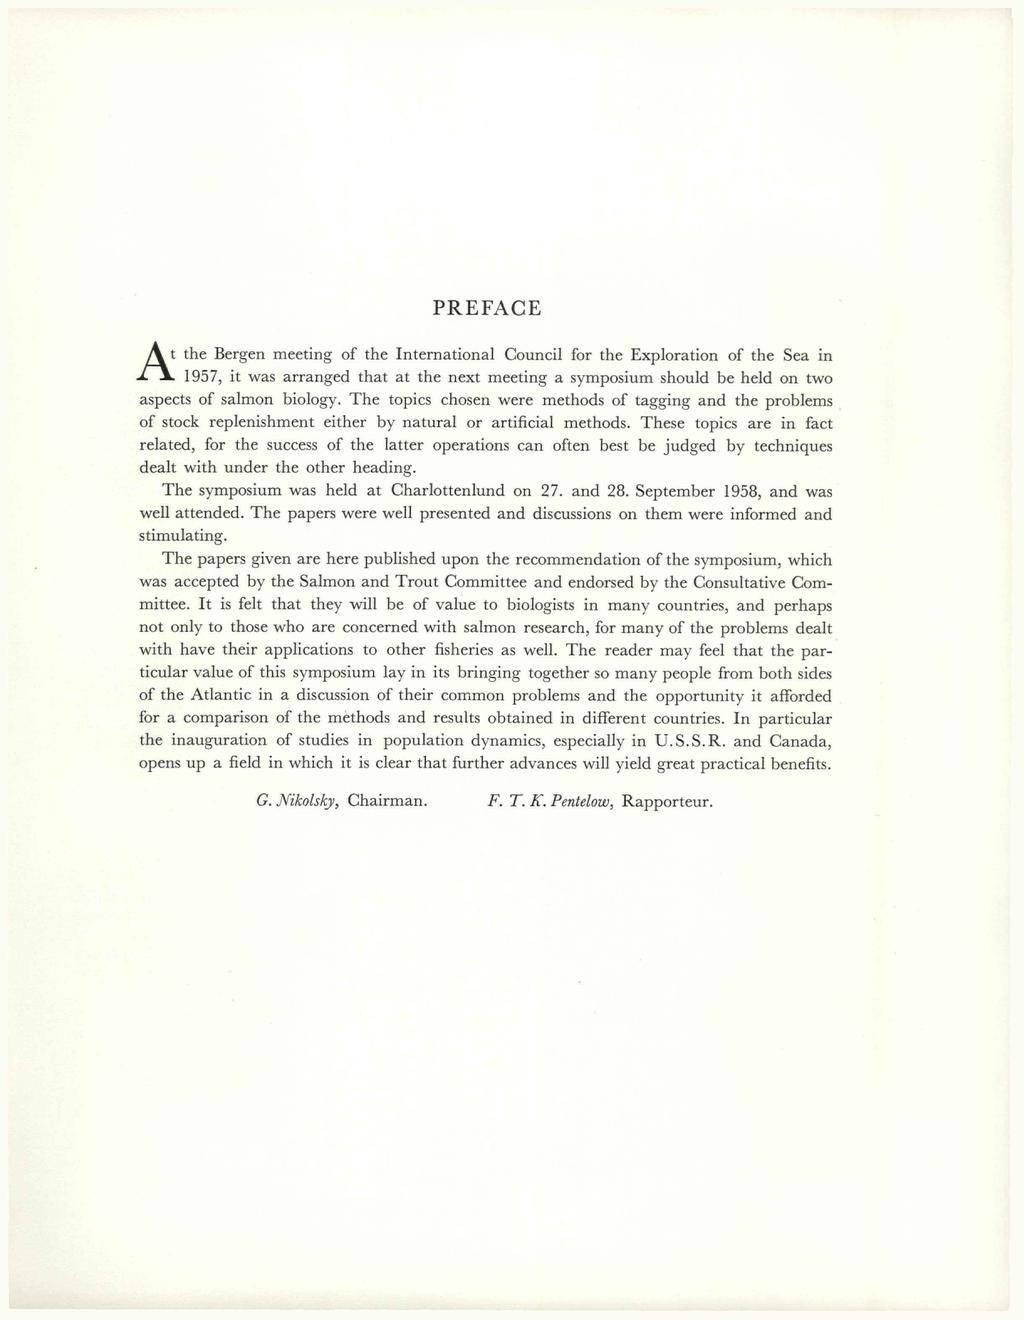 PREFACE At the Bergen meeting of the International Council for the Exploration of the Sea in - 1957, it was arranged that at the next meeting a symposium should be held on two aspects of salmon